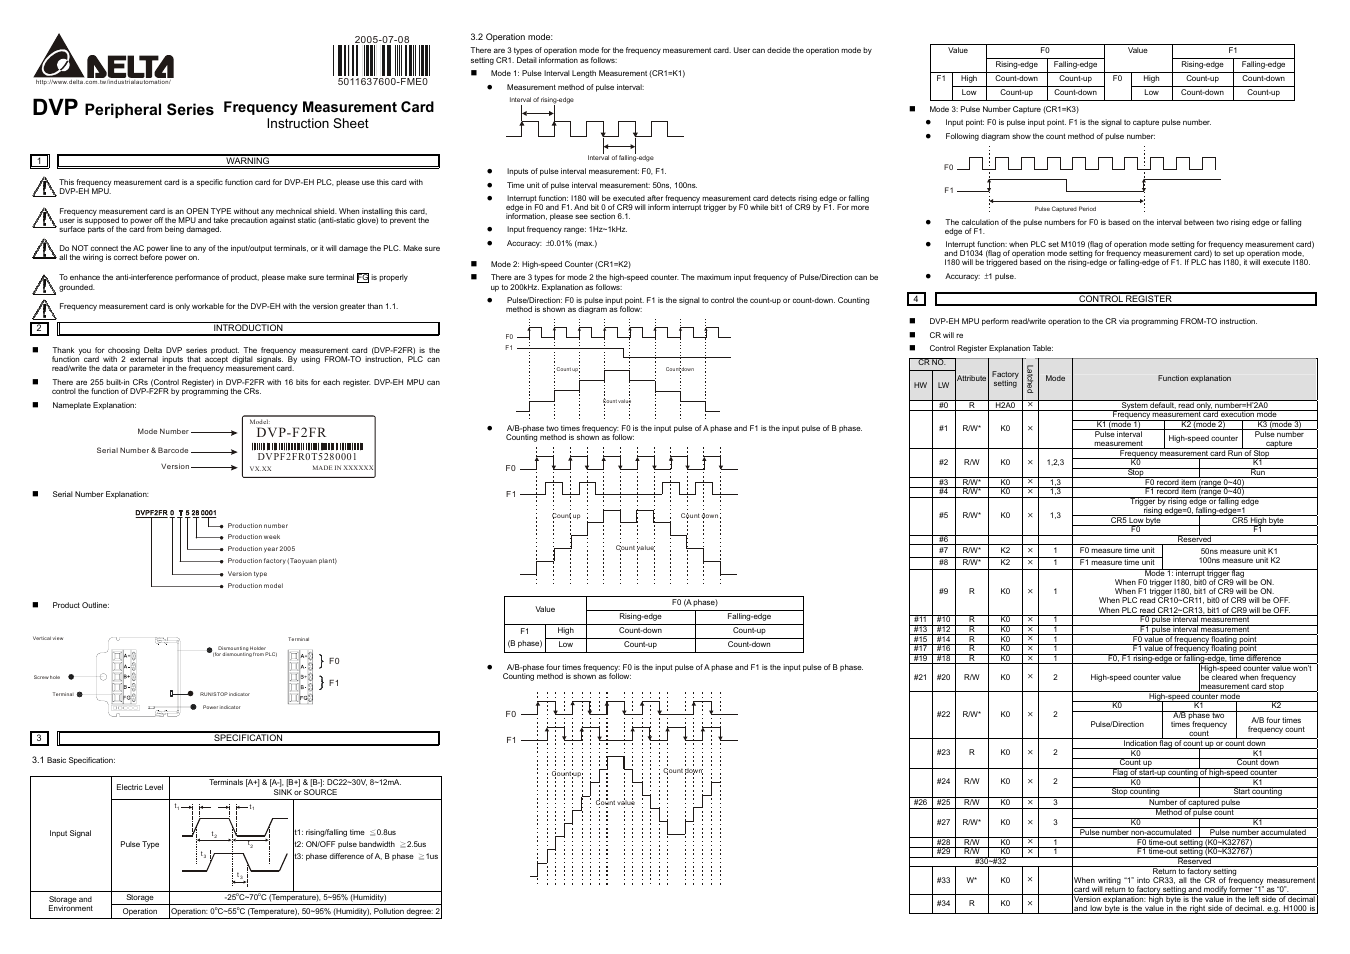 Frequency Measurement Card DVP-F2FR